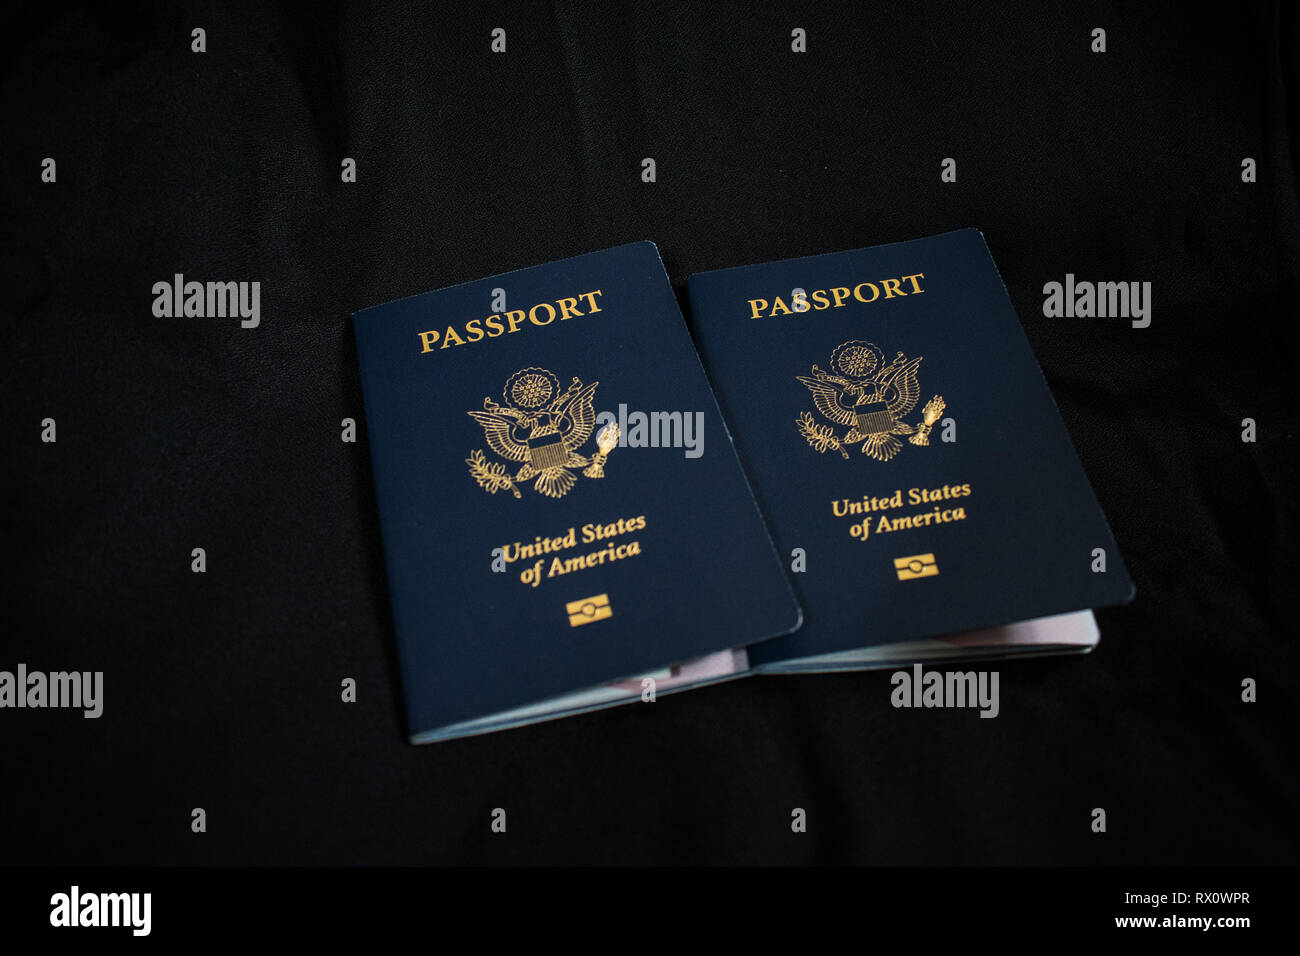 Two US passports on a black background Stock Photo